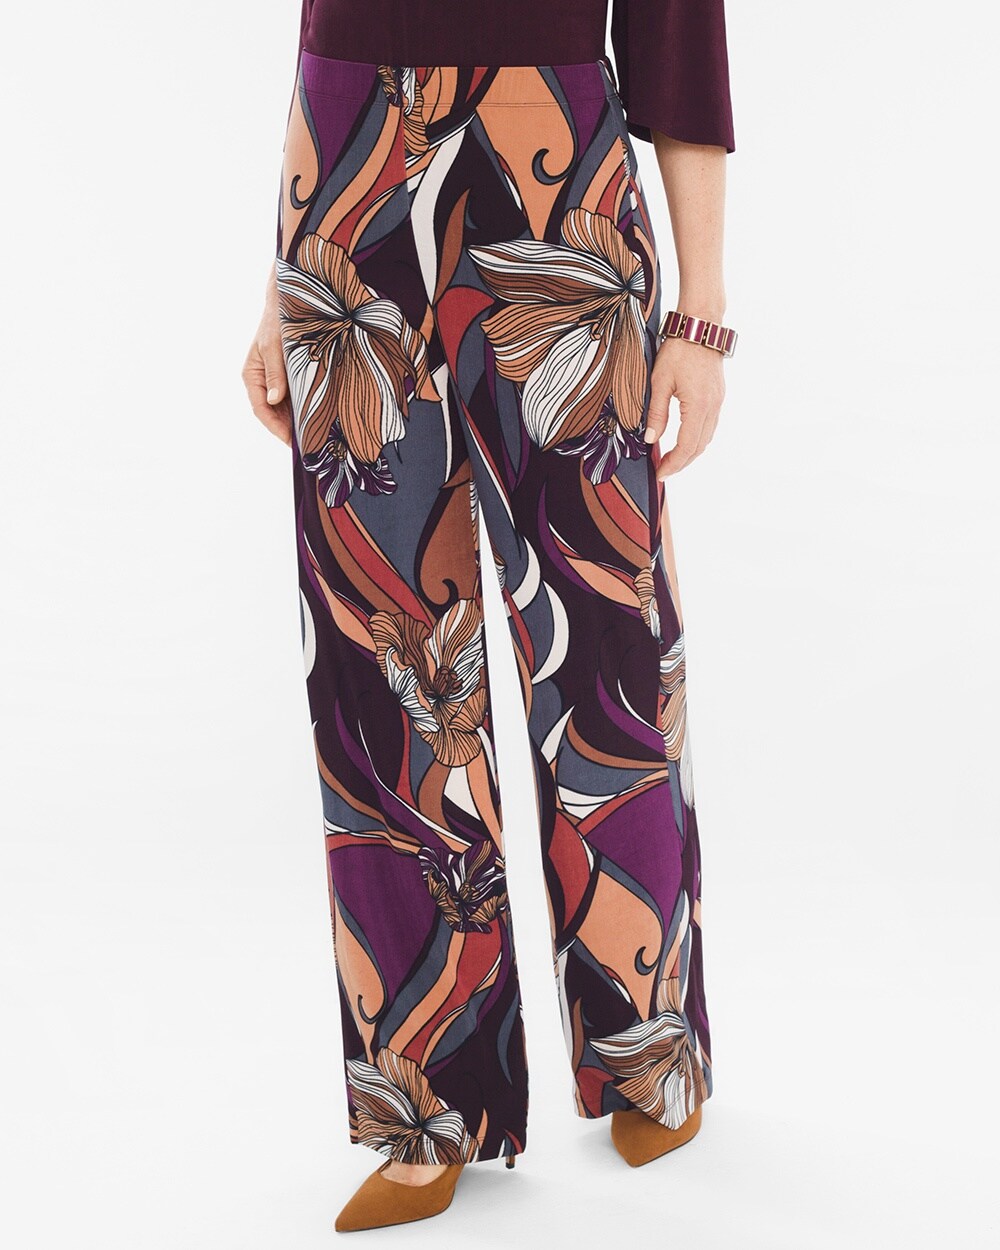 Travelers Classic Baroque Floral Palazzo Pants